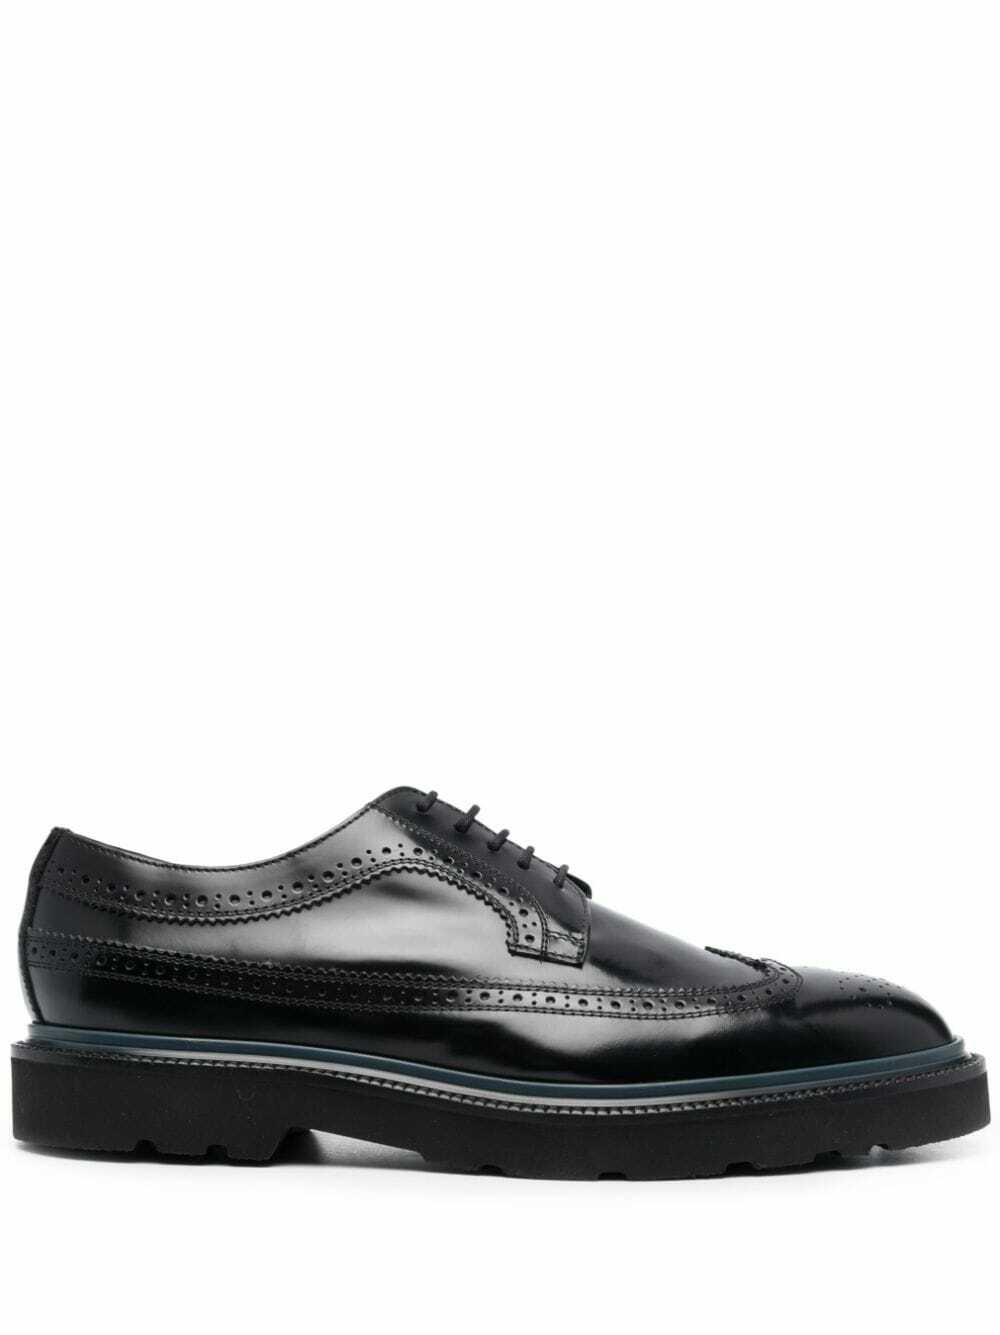 PAUL SMITH - Leather Brogues Paul Smith